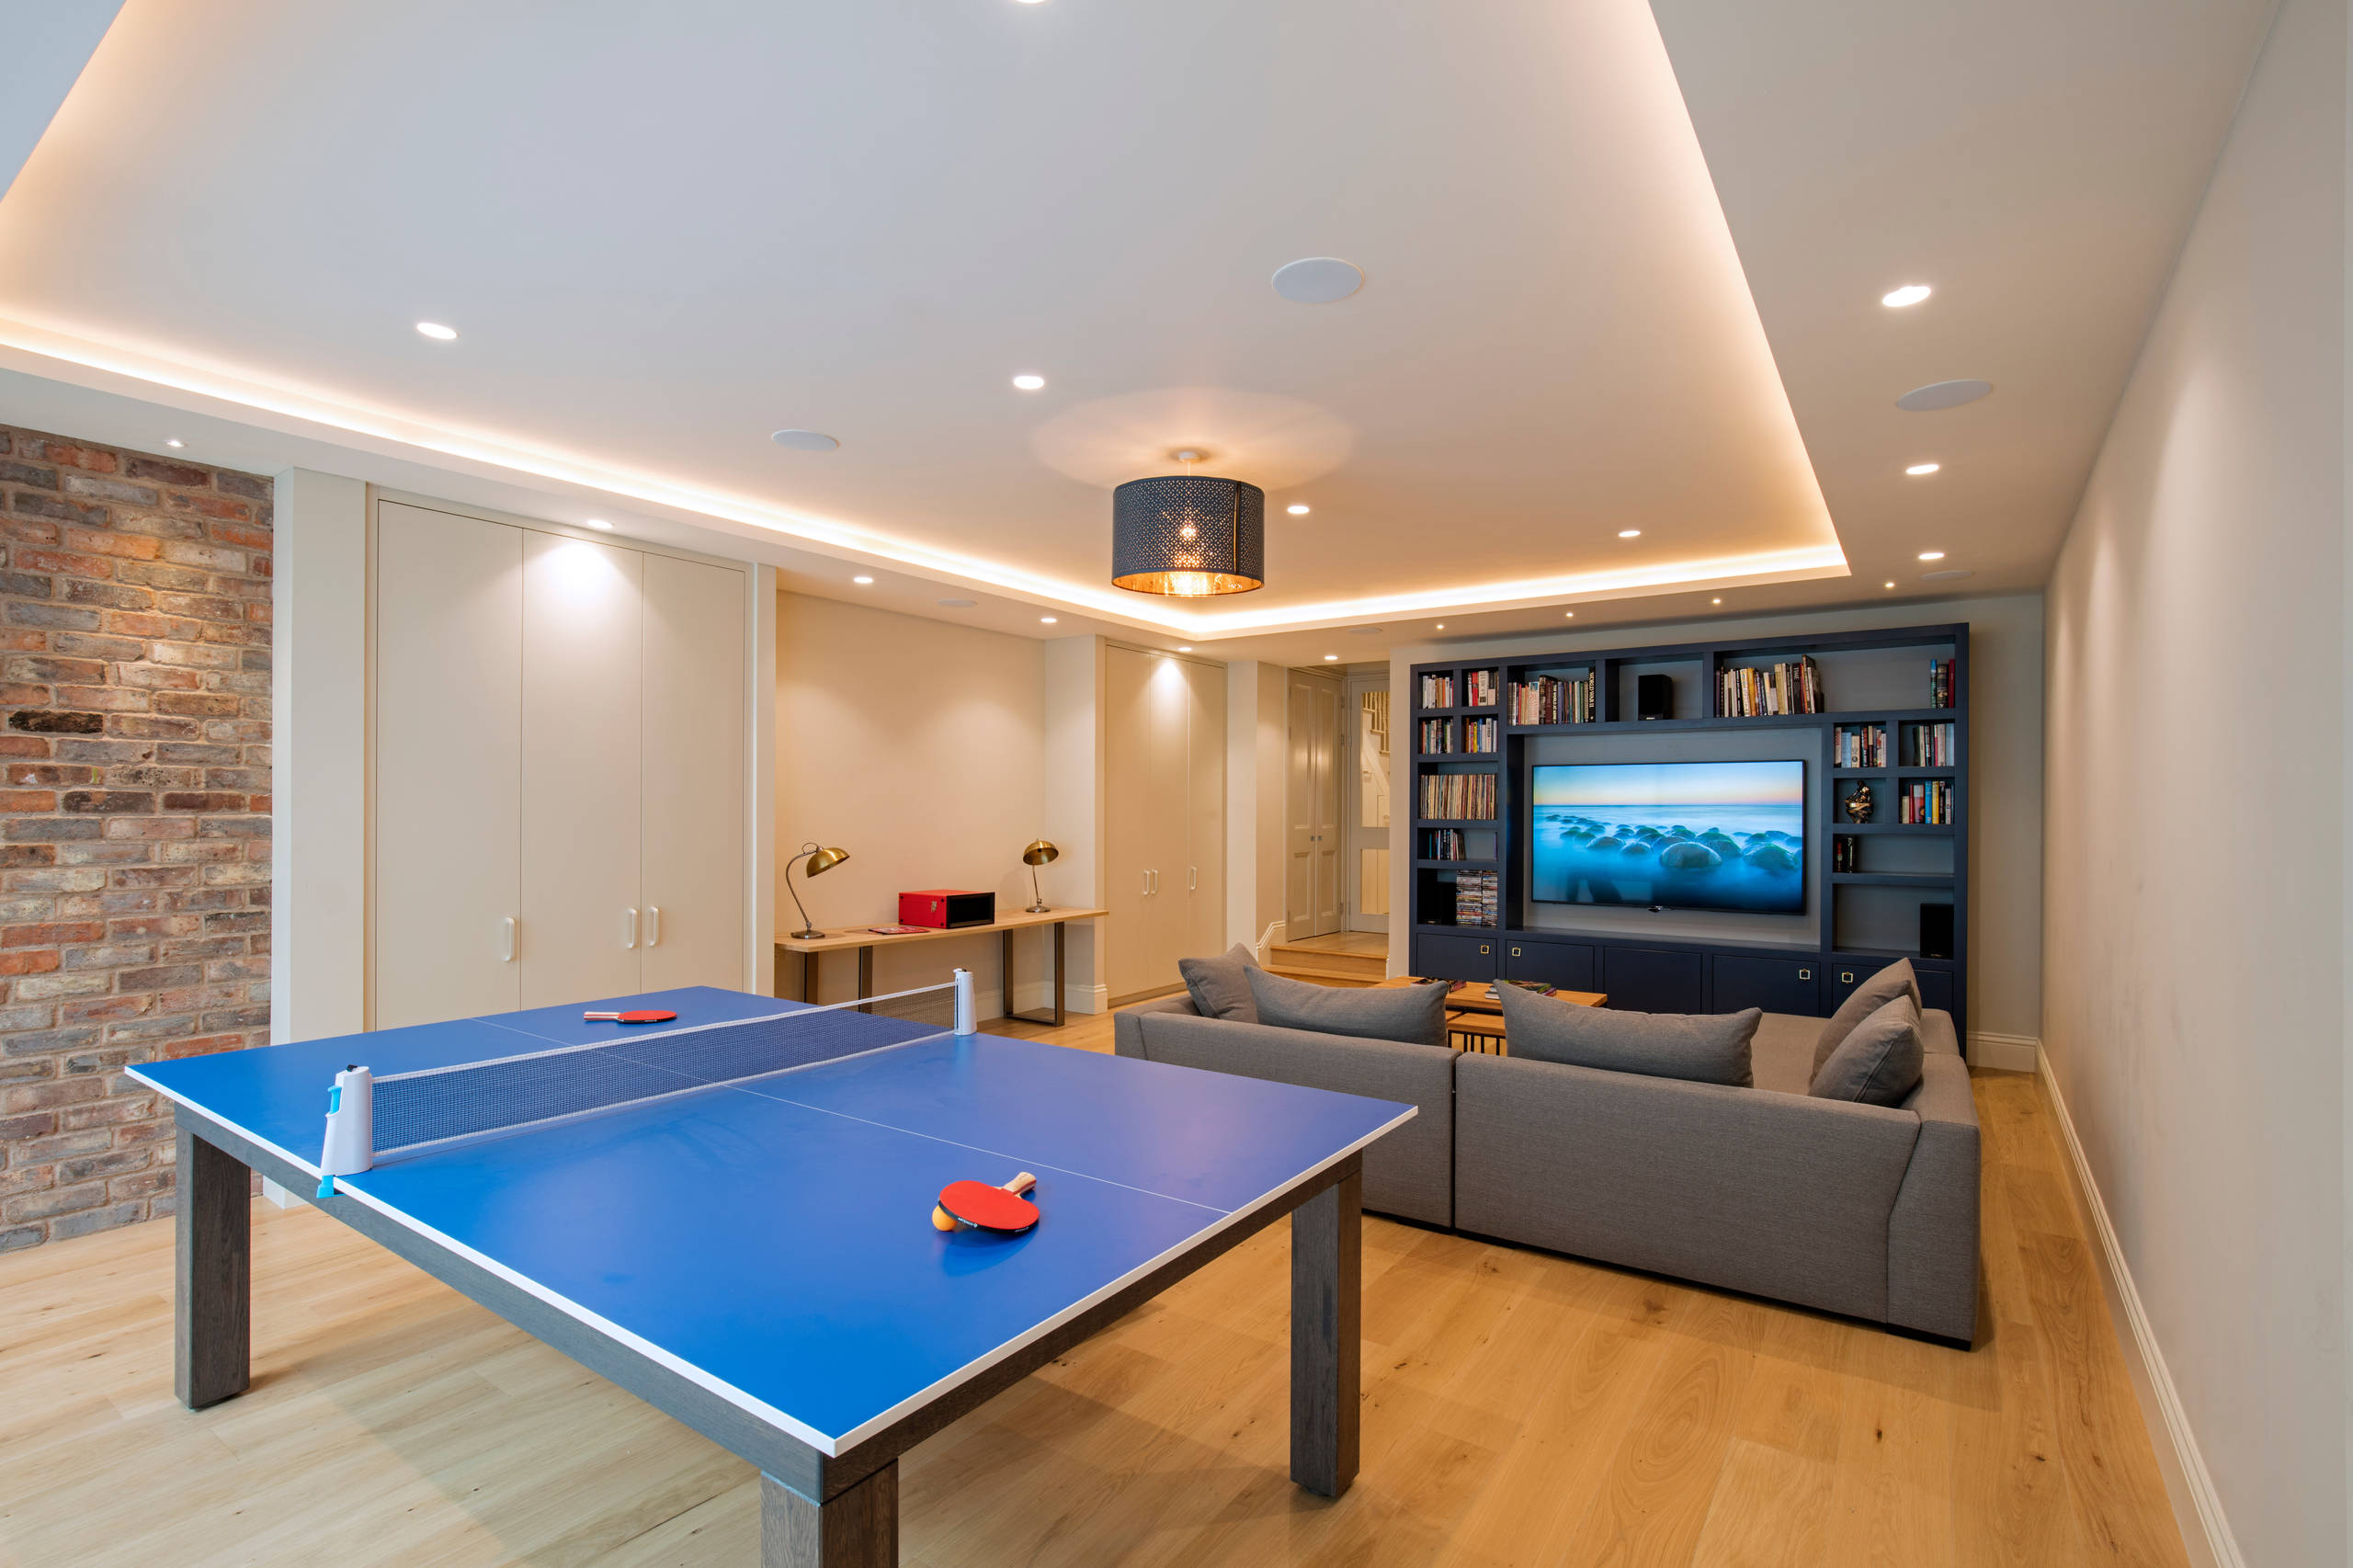 75 Beautiful Game Room Pictures Ideas July 2021 Houzz